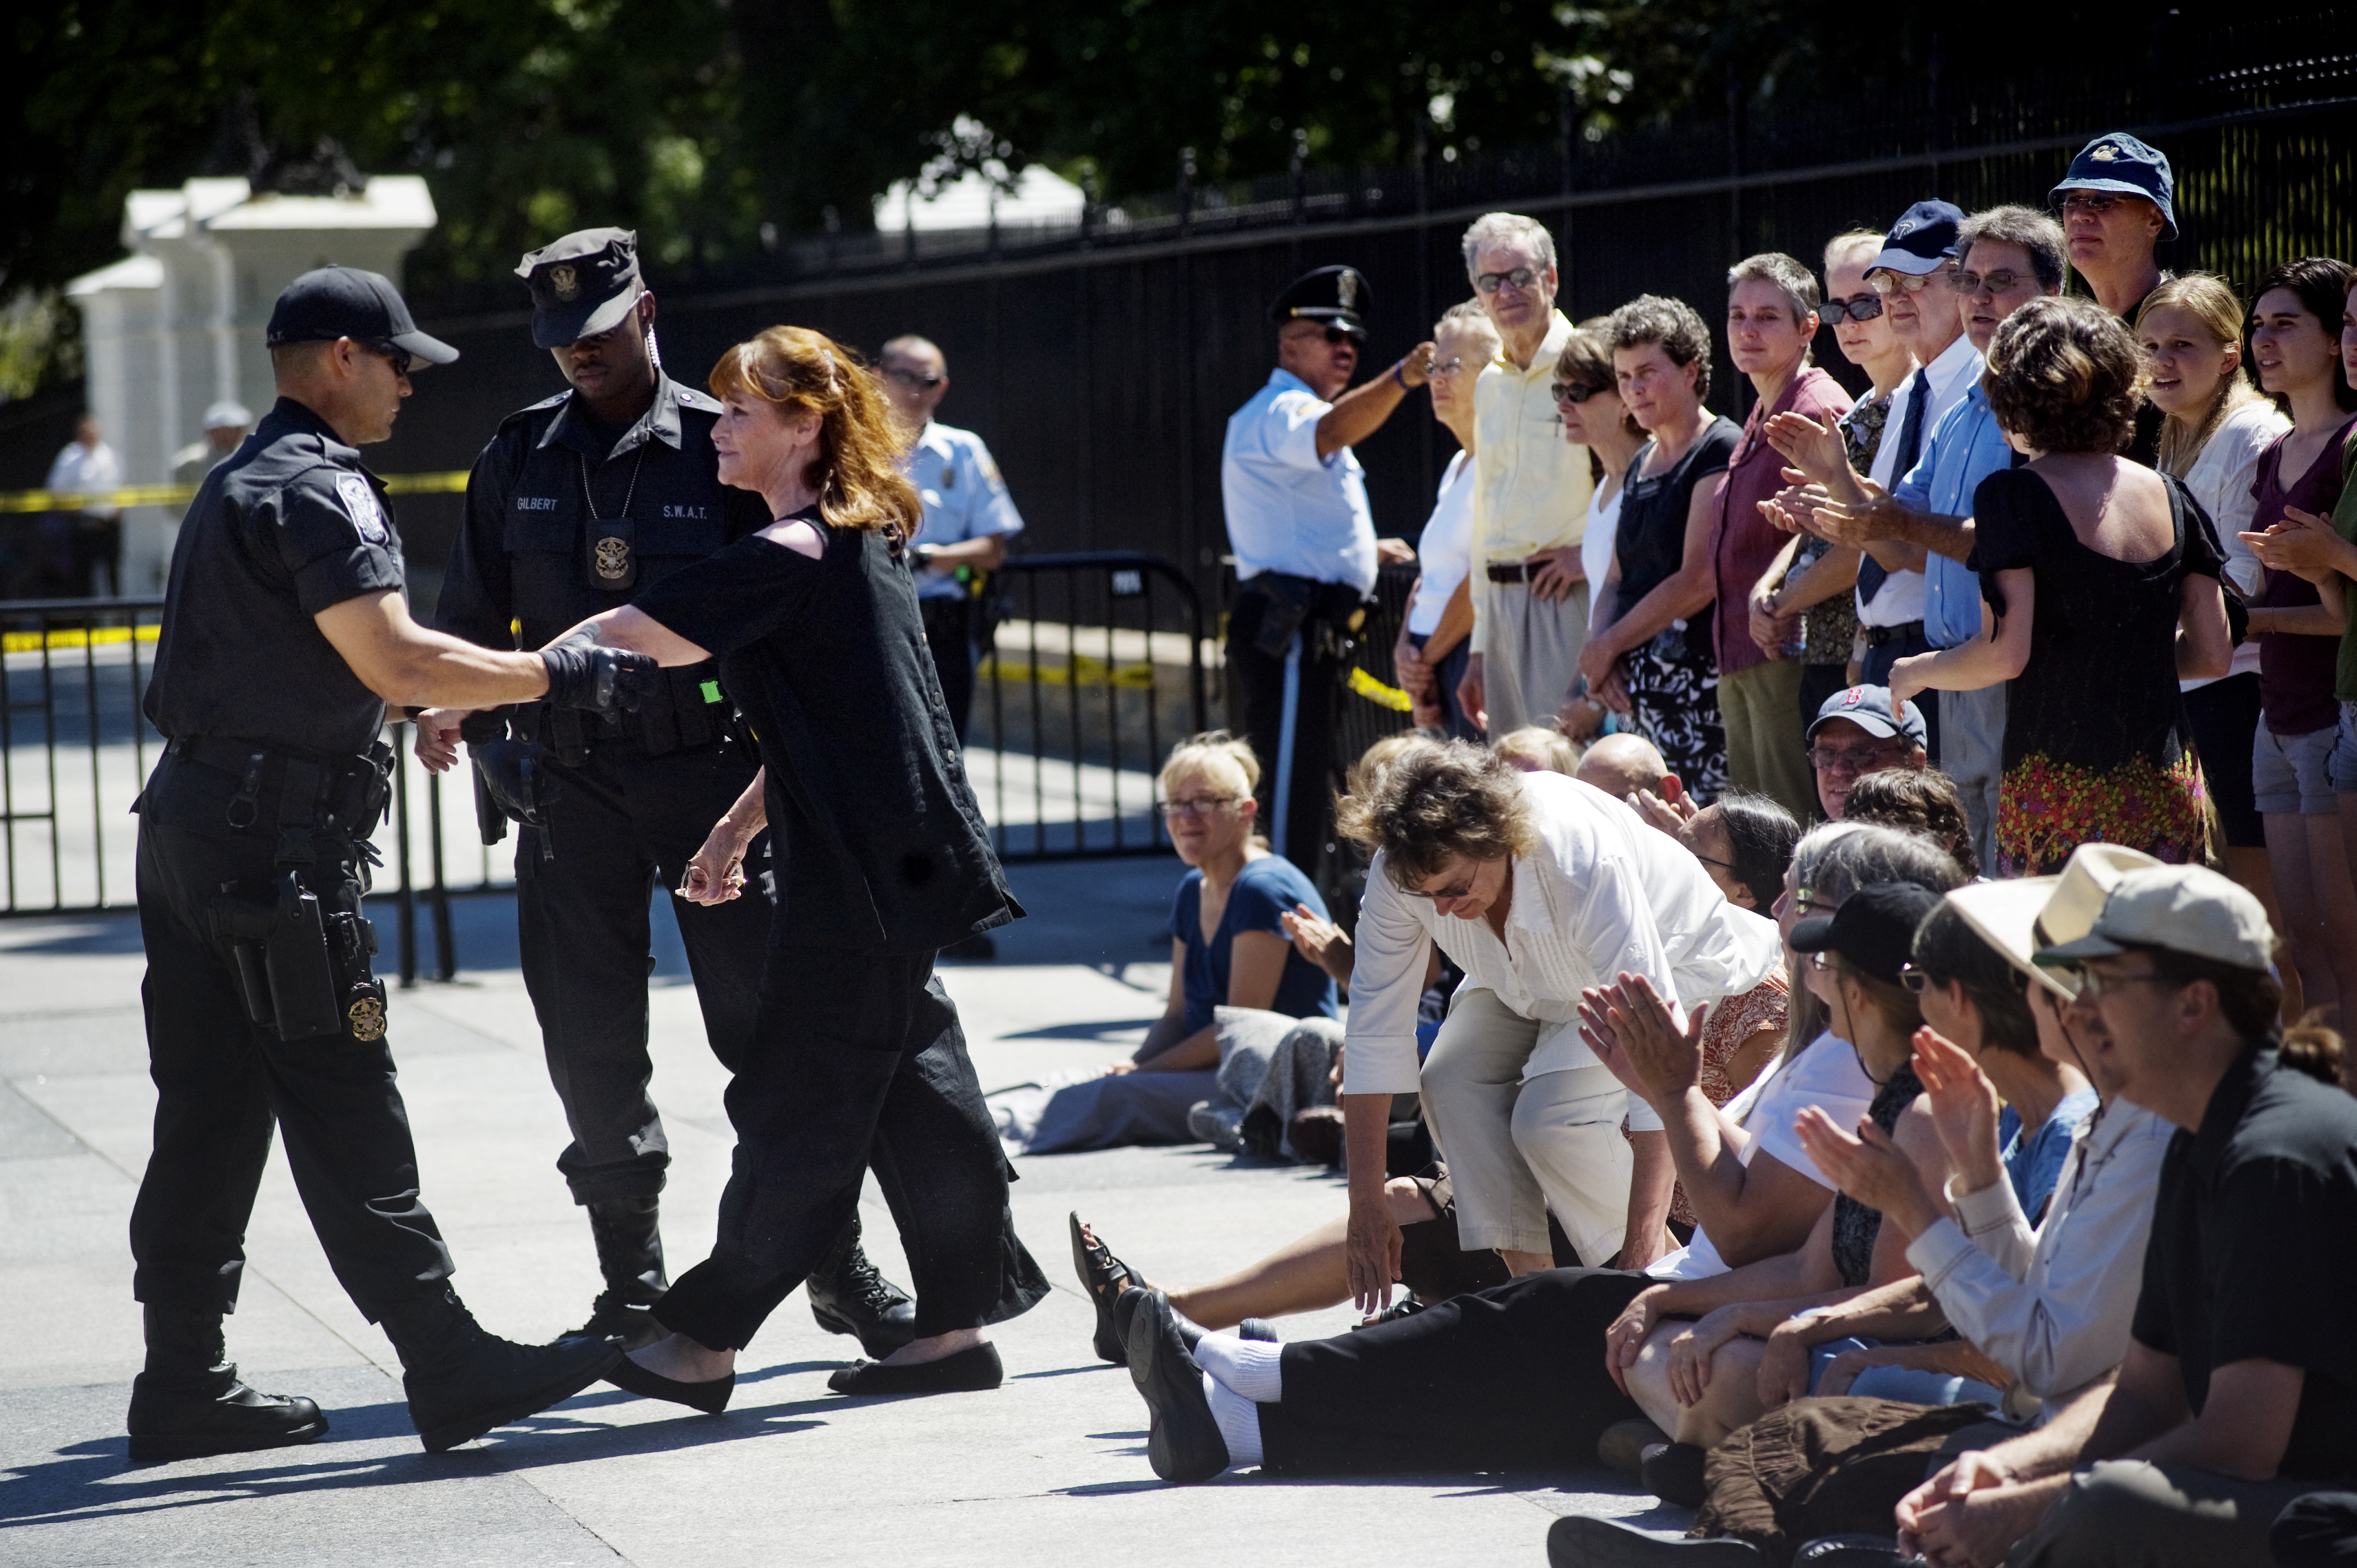 Margot Kidder, is arrested during day 4 of the Tar Sands Action in front of the White House on August 23, 2011 in Washington, DC. | Source: Getty Images